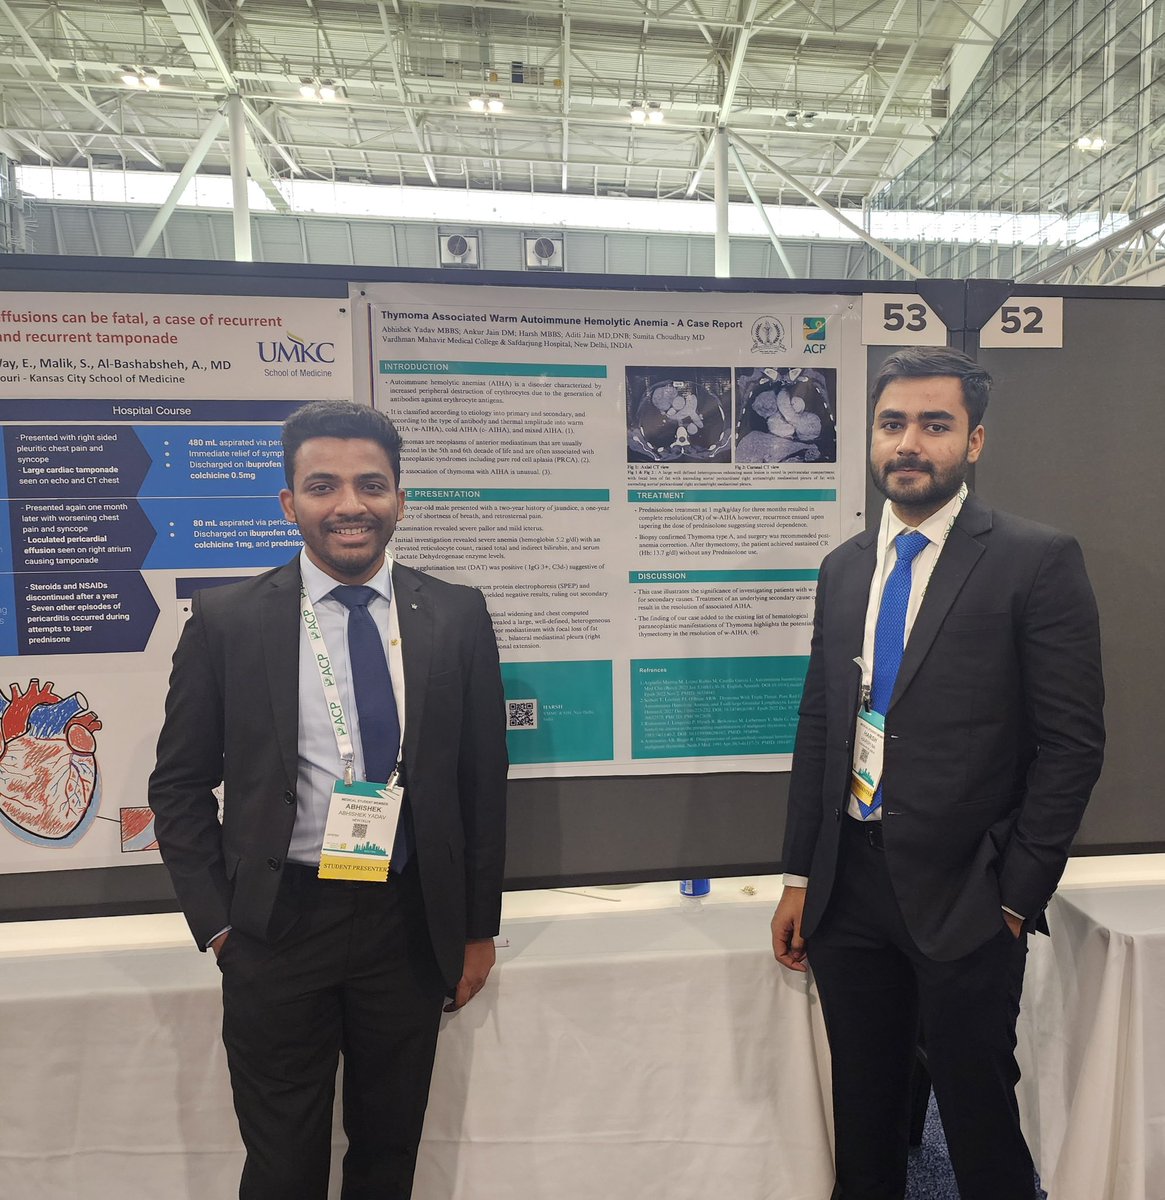 ACP Boston was an enlightening experience. Sharing our poster with inspiring minds was incredible. Looking forward to ACP New Orleans 2025! @ACPIMPhysicians #ACP2024